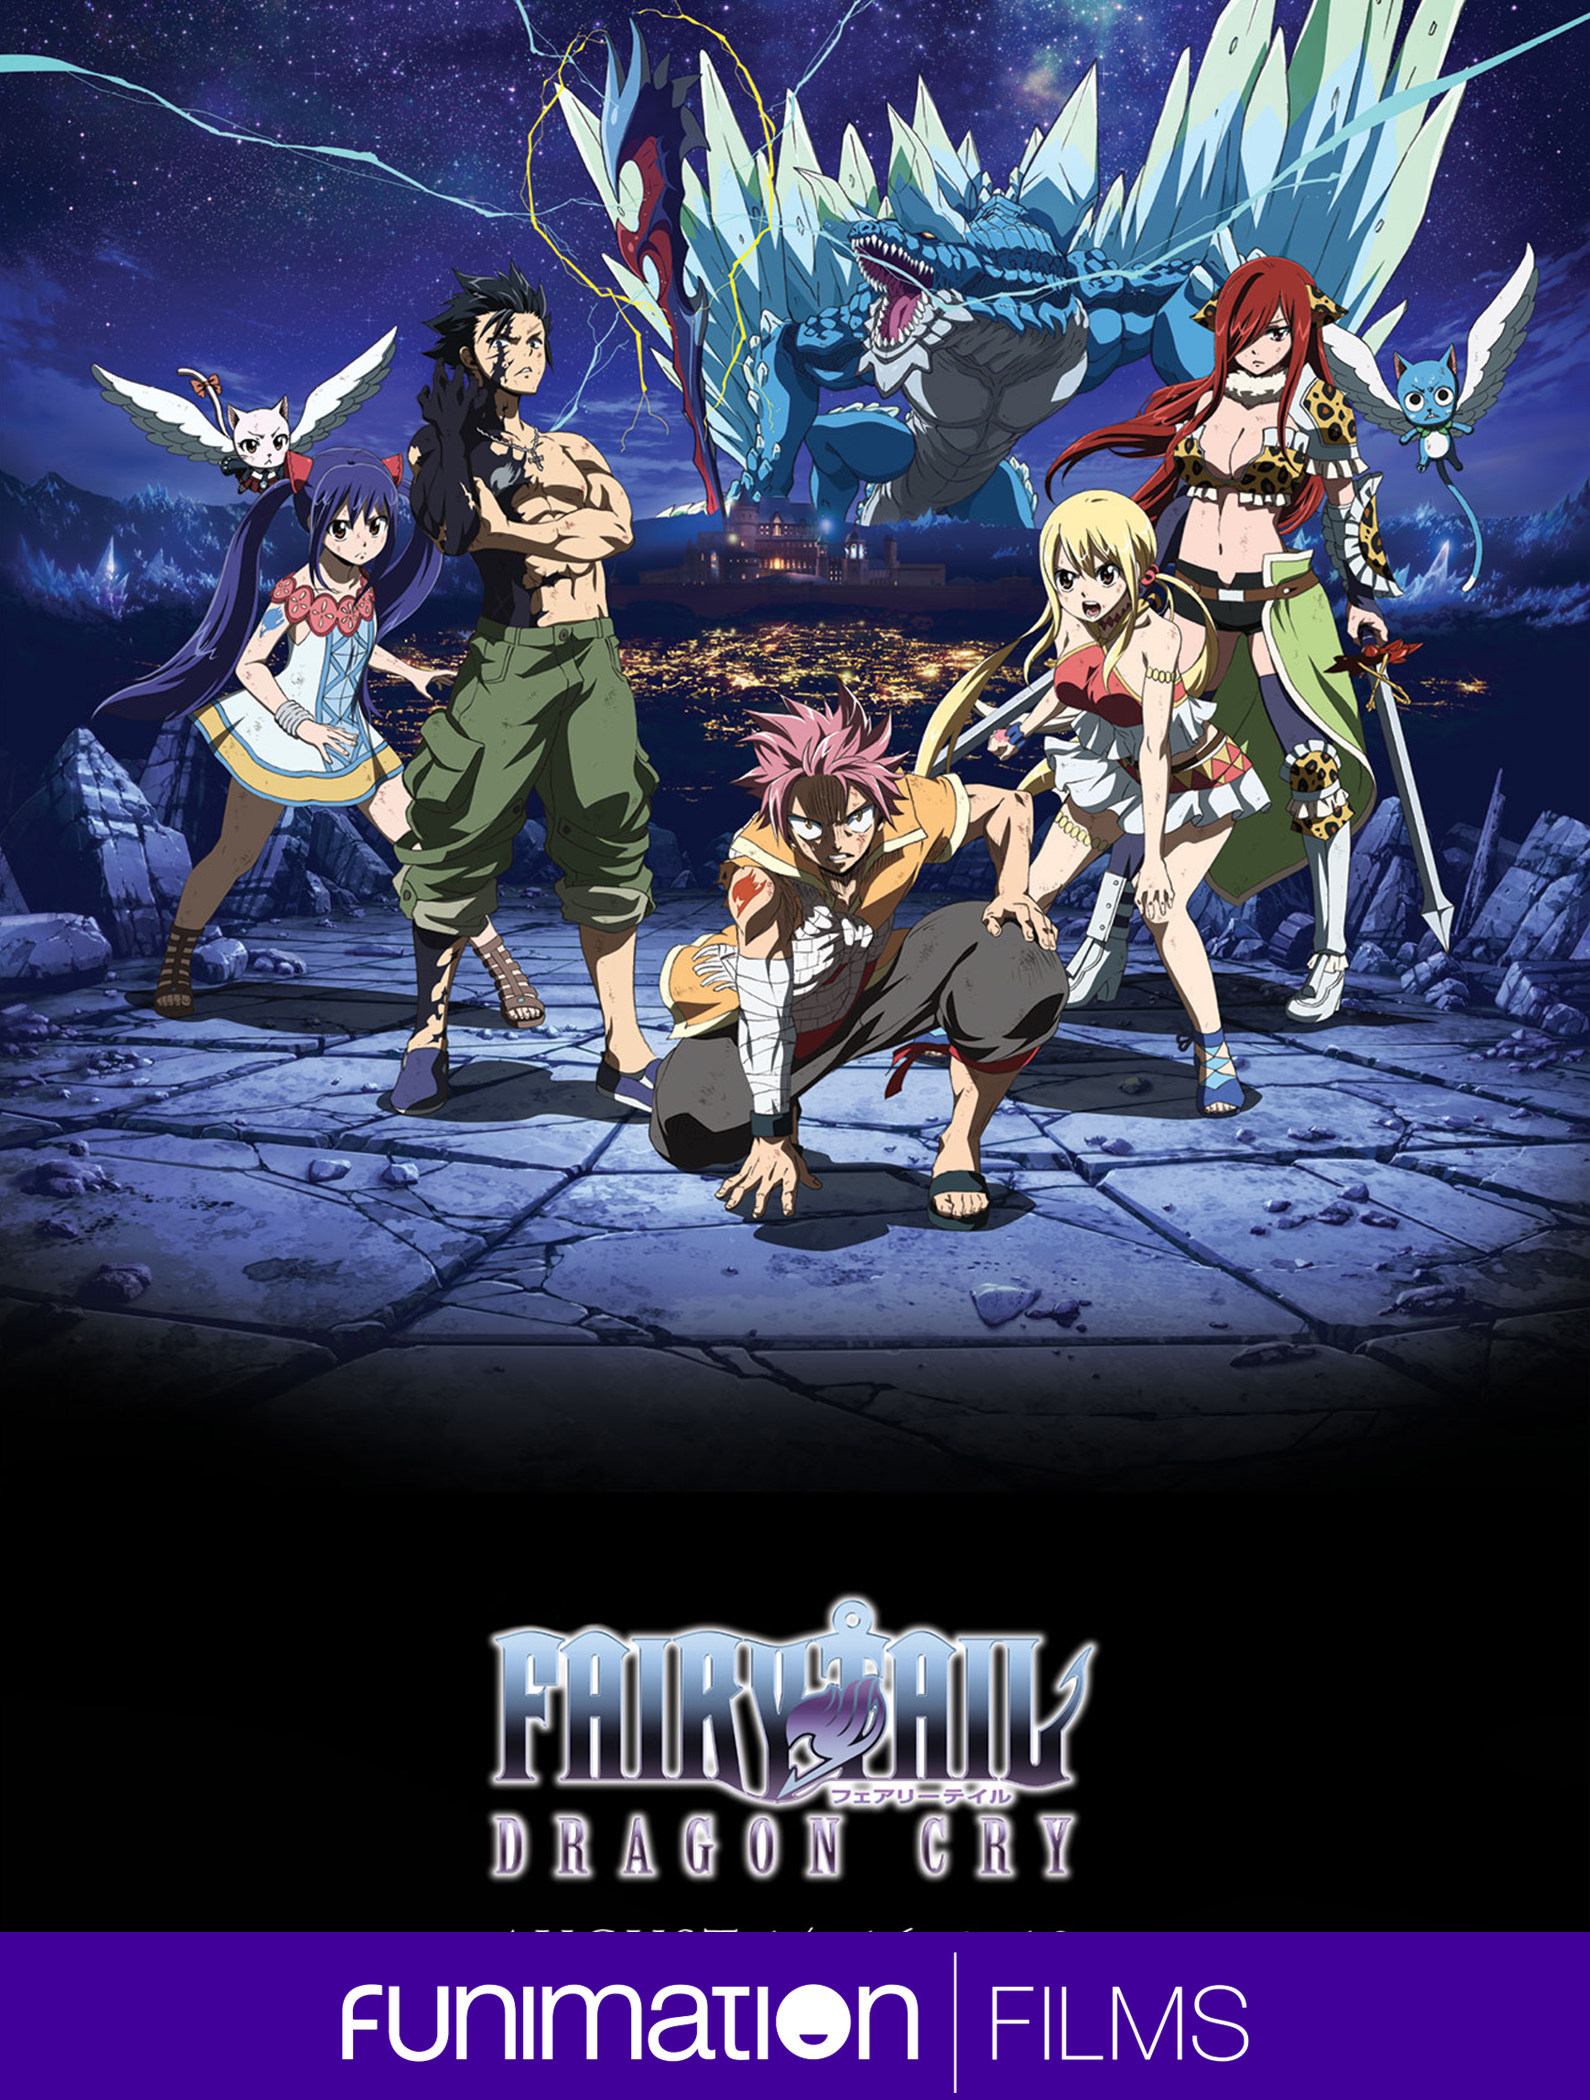 Fairy Tail Dragon Cry To Cast Spell On U S And Canadian Audiences With Limited Theatrical Run August 14 16 17 19